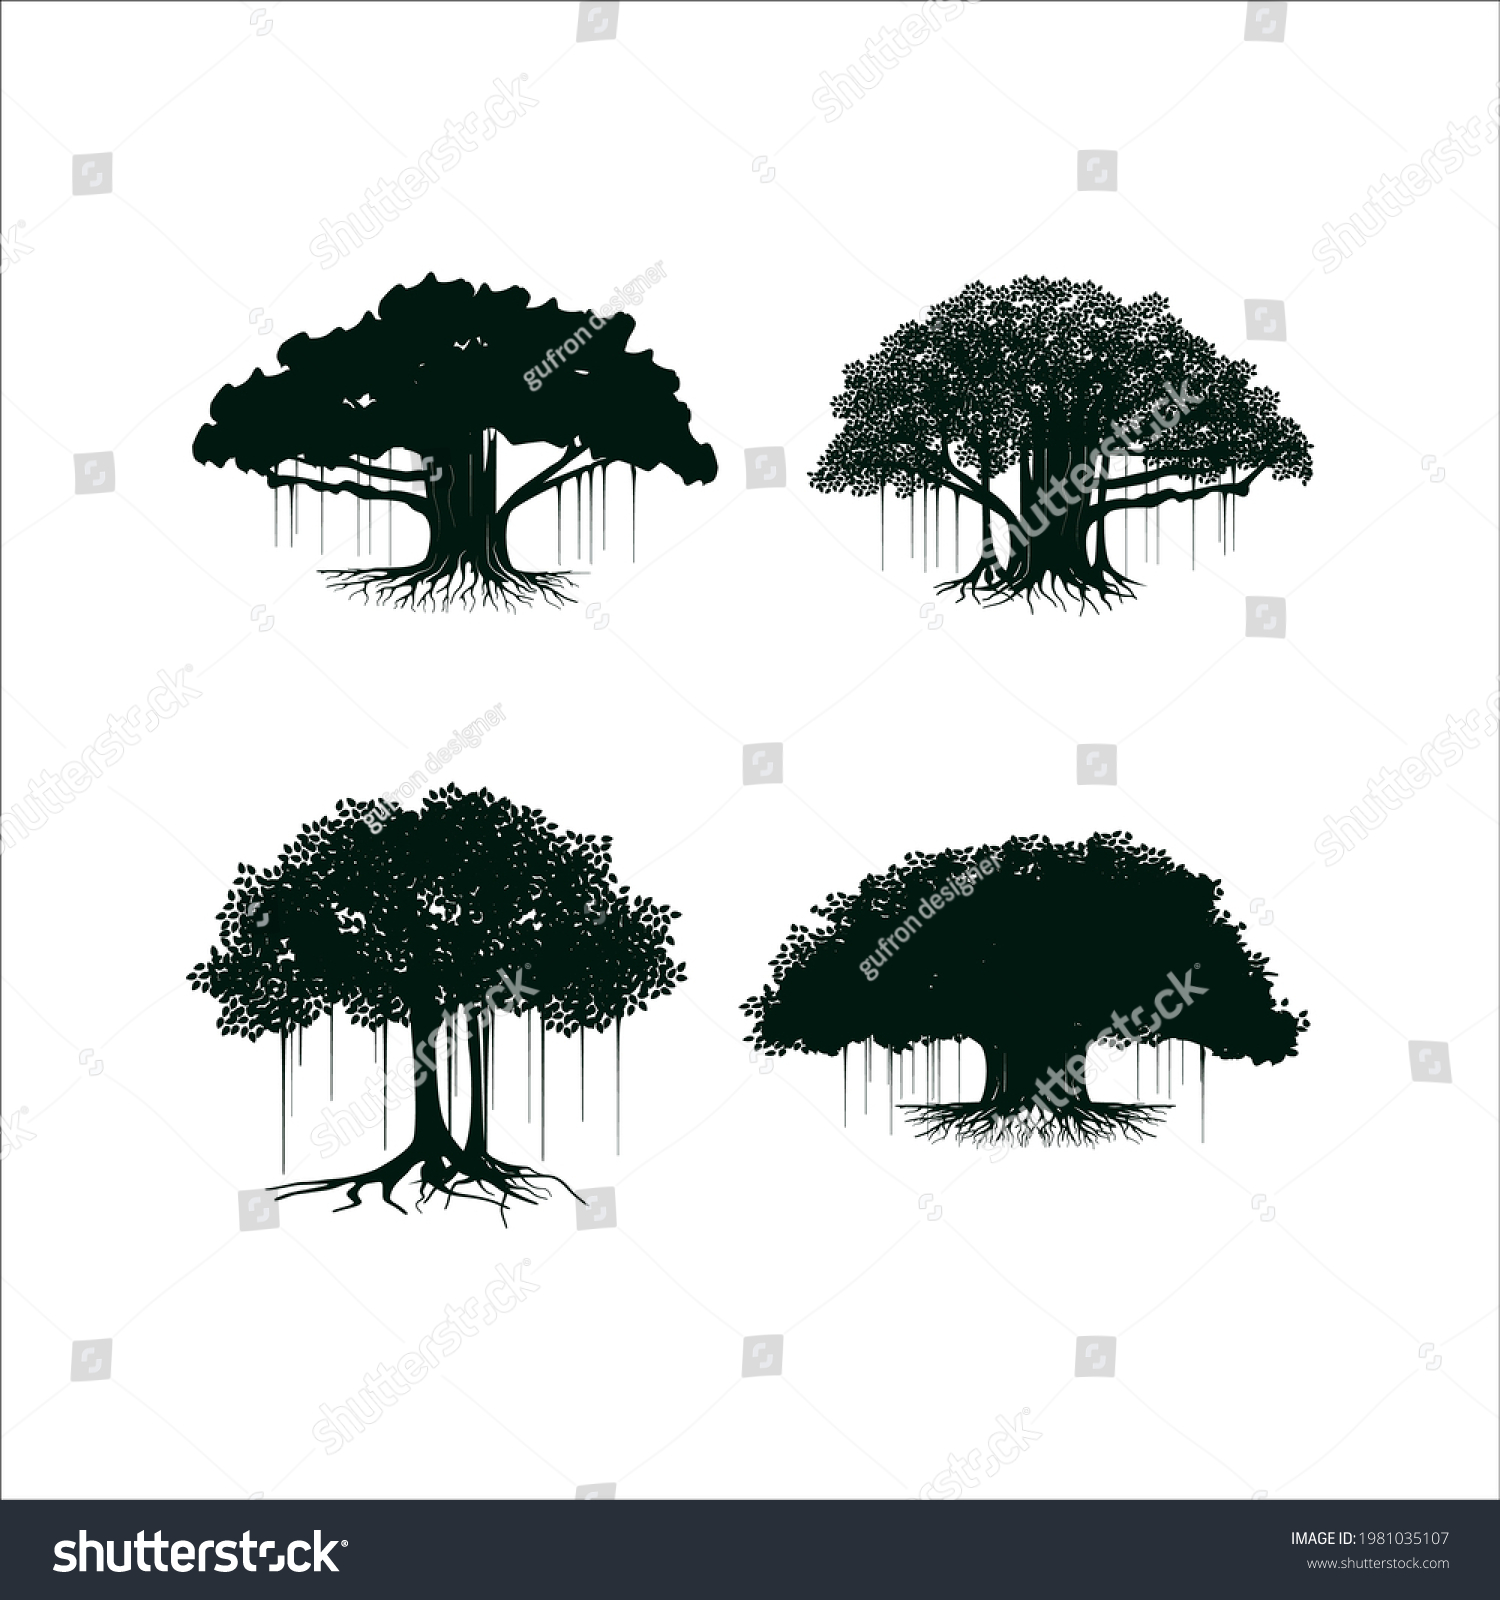 SVG of Tree vector illustrations, roots, banyan tree isolated on white background. svg